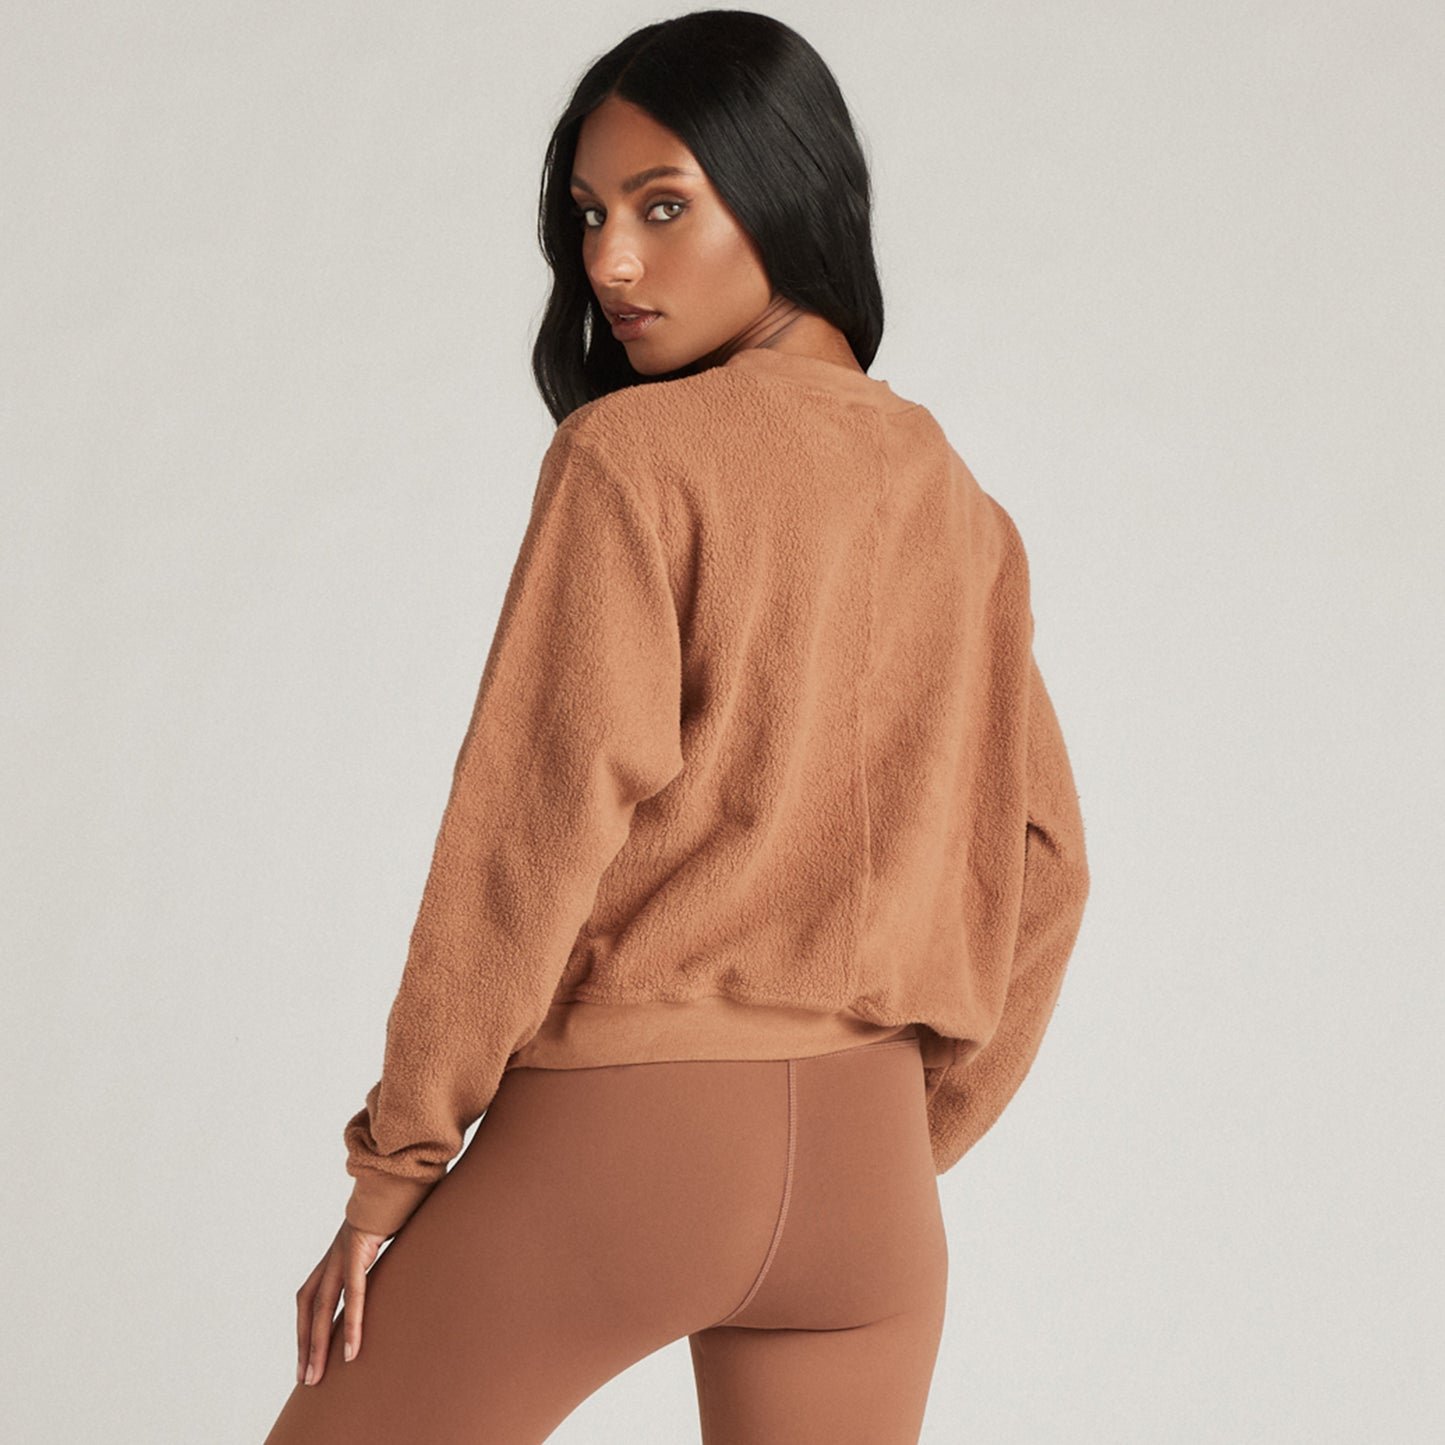 Strut This Georgie Sweatshirt. This slightly cropped pullover is a cold-weather essential. Made from ultra-soft fibers and designed with a chic high neck, this sweatshirt will keep you warm and comfortable all season long.